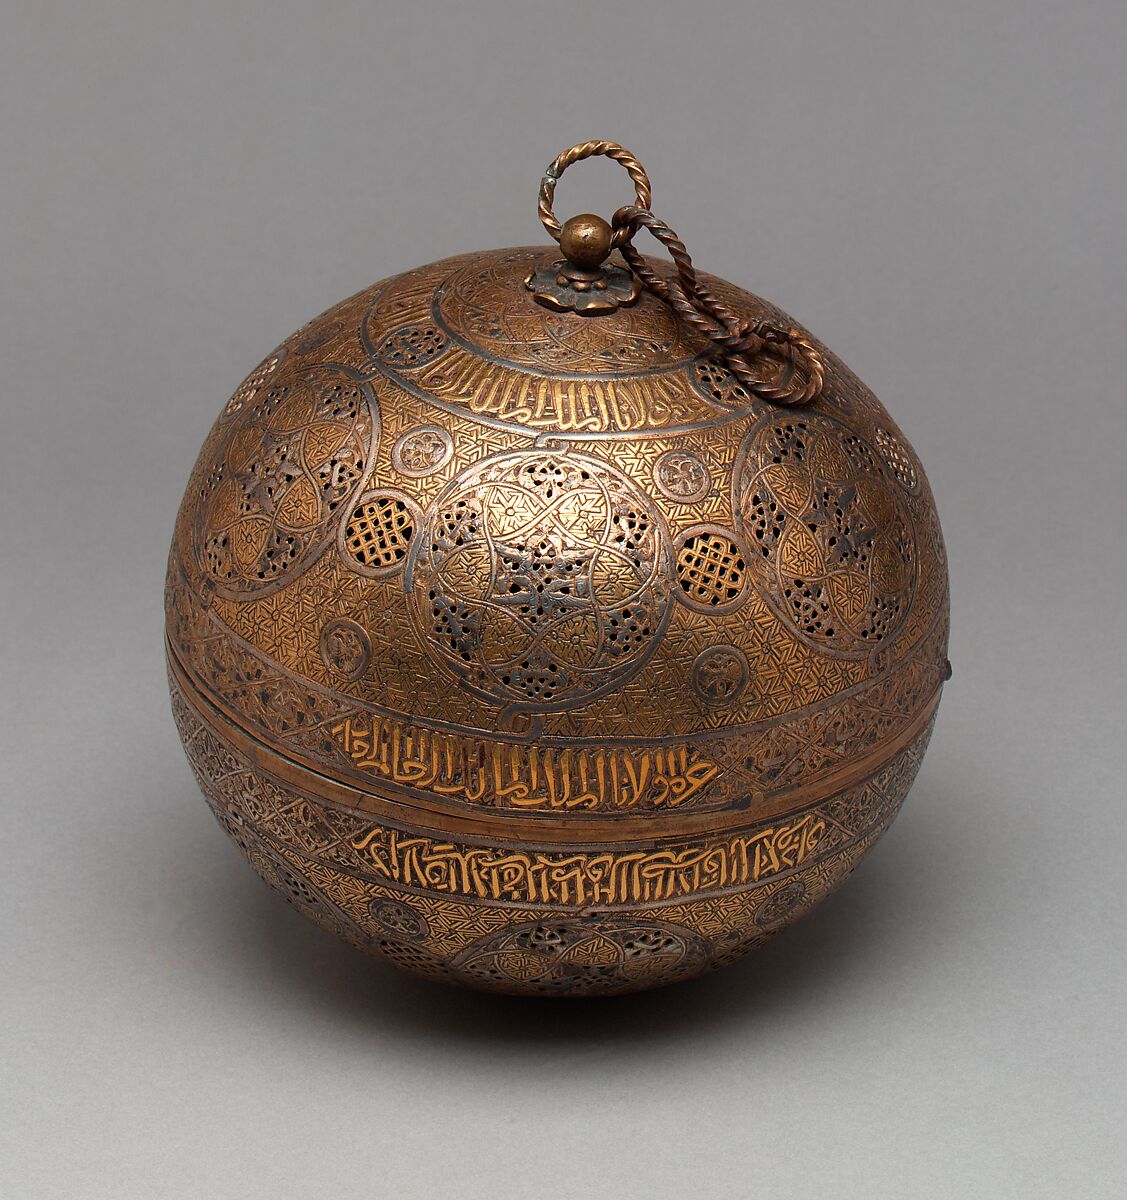 Pierced Globe, Brass; spun and turned, pierced, chased, inlaid with gold, silver, and black compound 